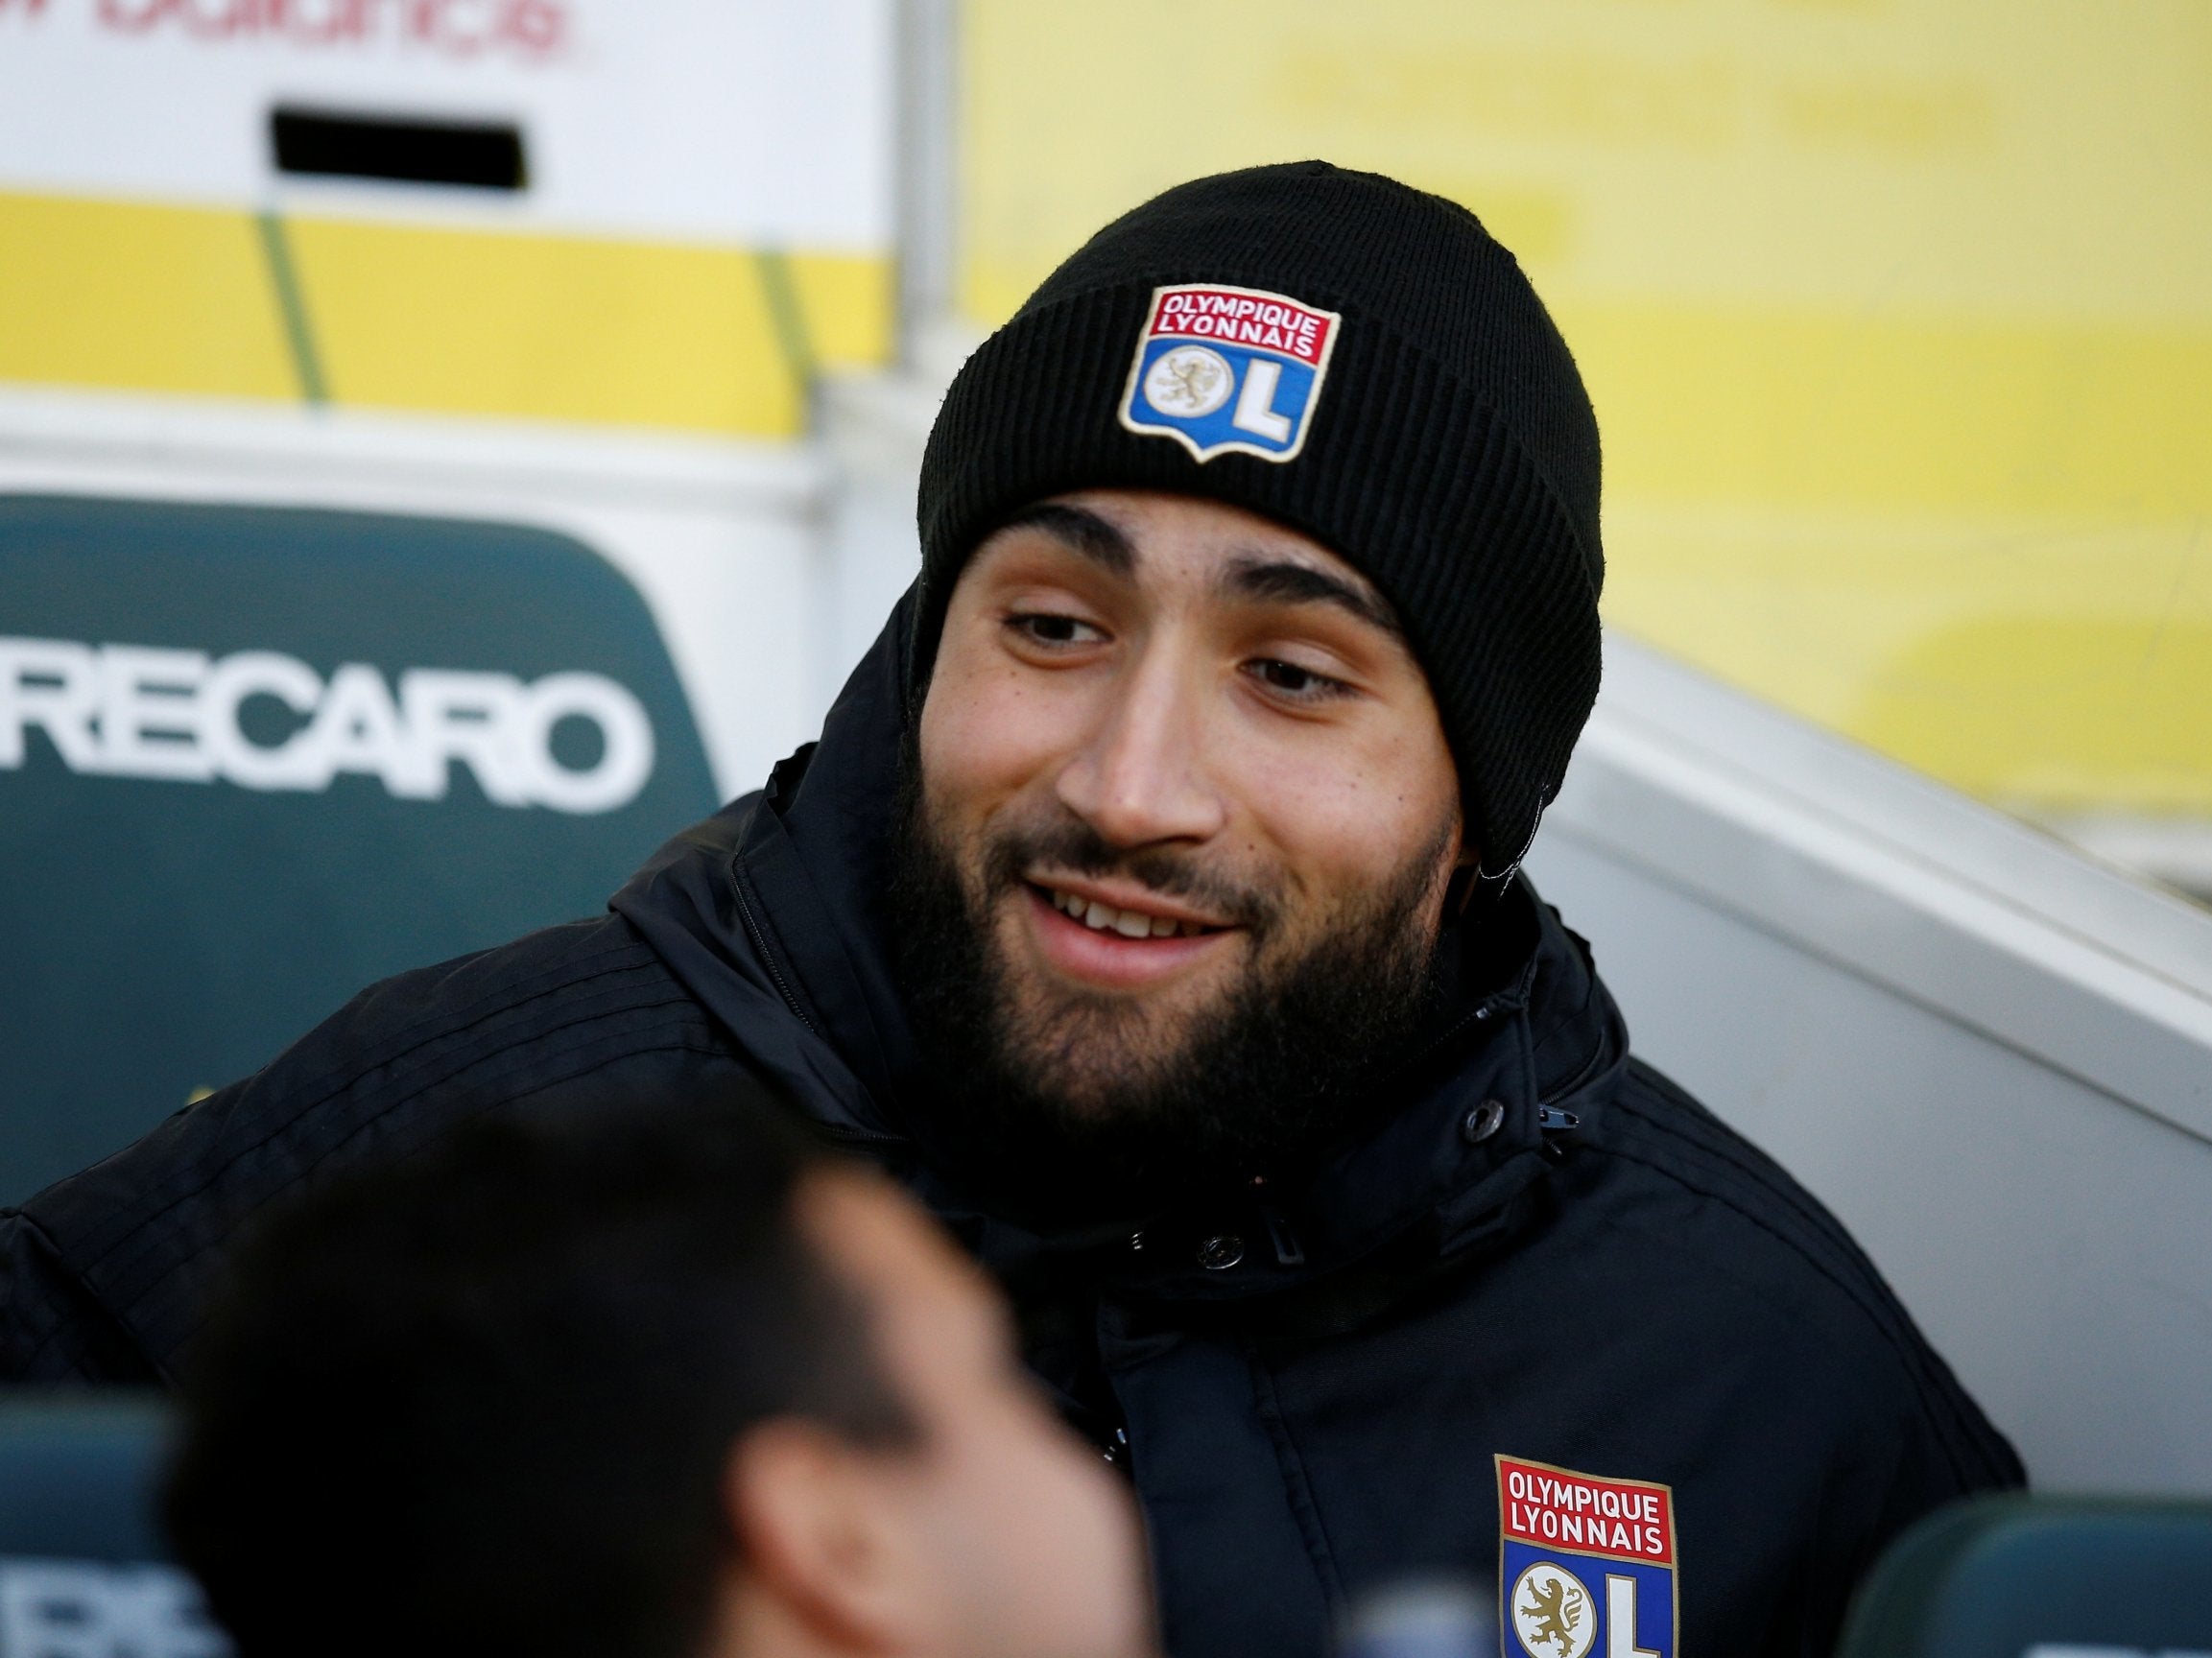 Lyon’s Nabil Fekir has reportedly been offered to Arsenal (Reuters)